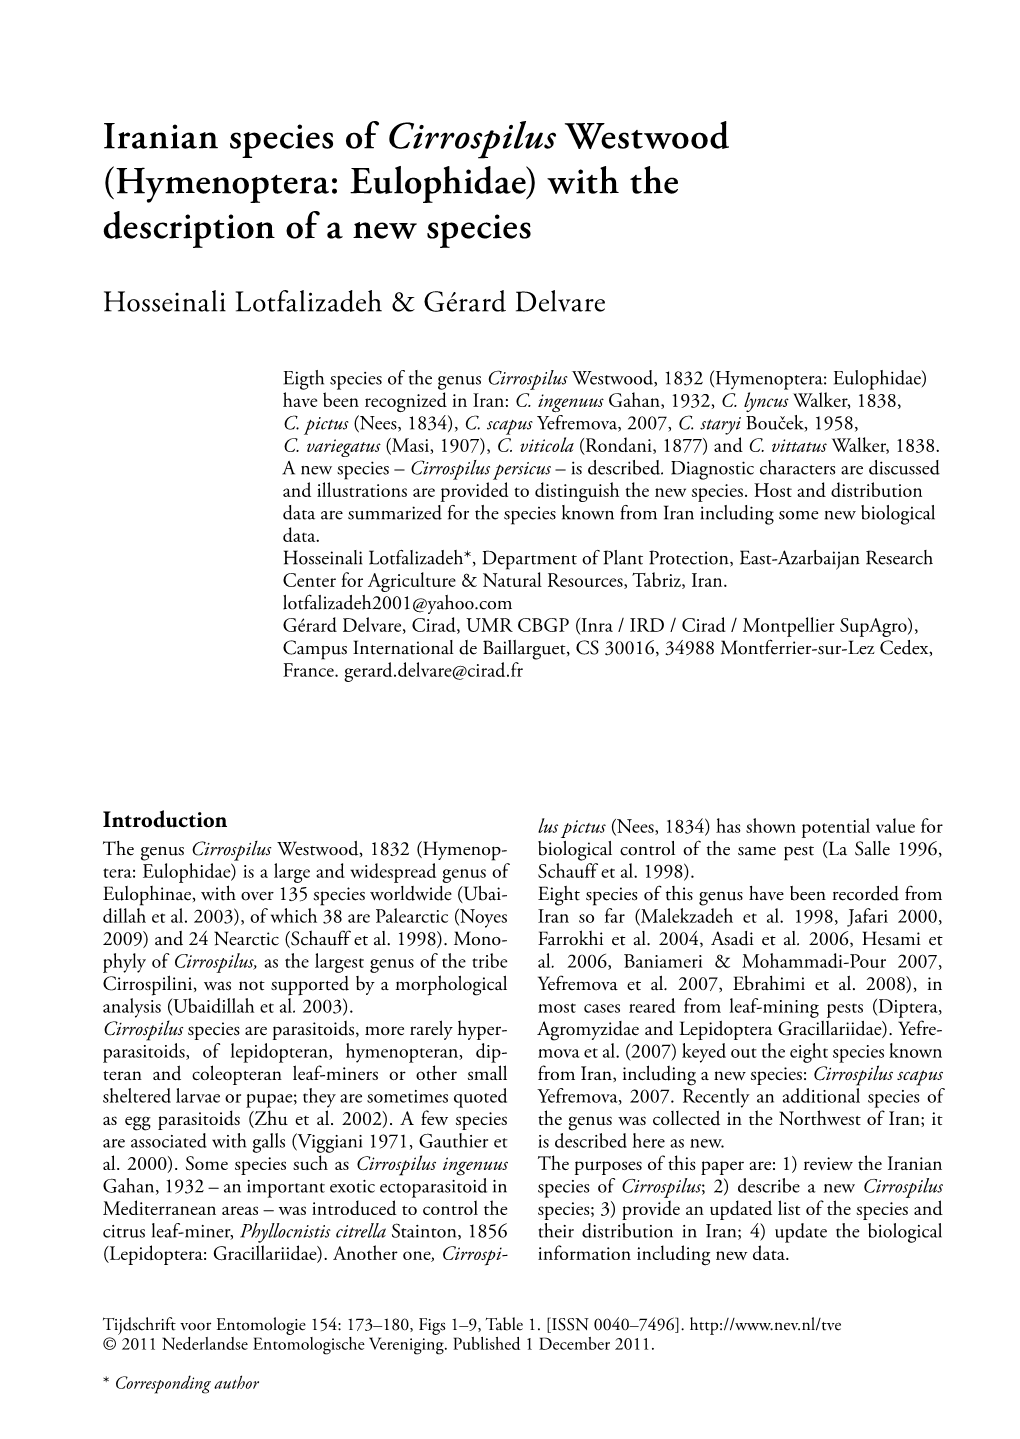 Iranian Species of Cirrospilus Westwood (Hymenoptera: Eulophidae) with the Description of a New Species